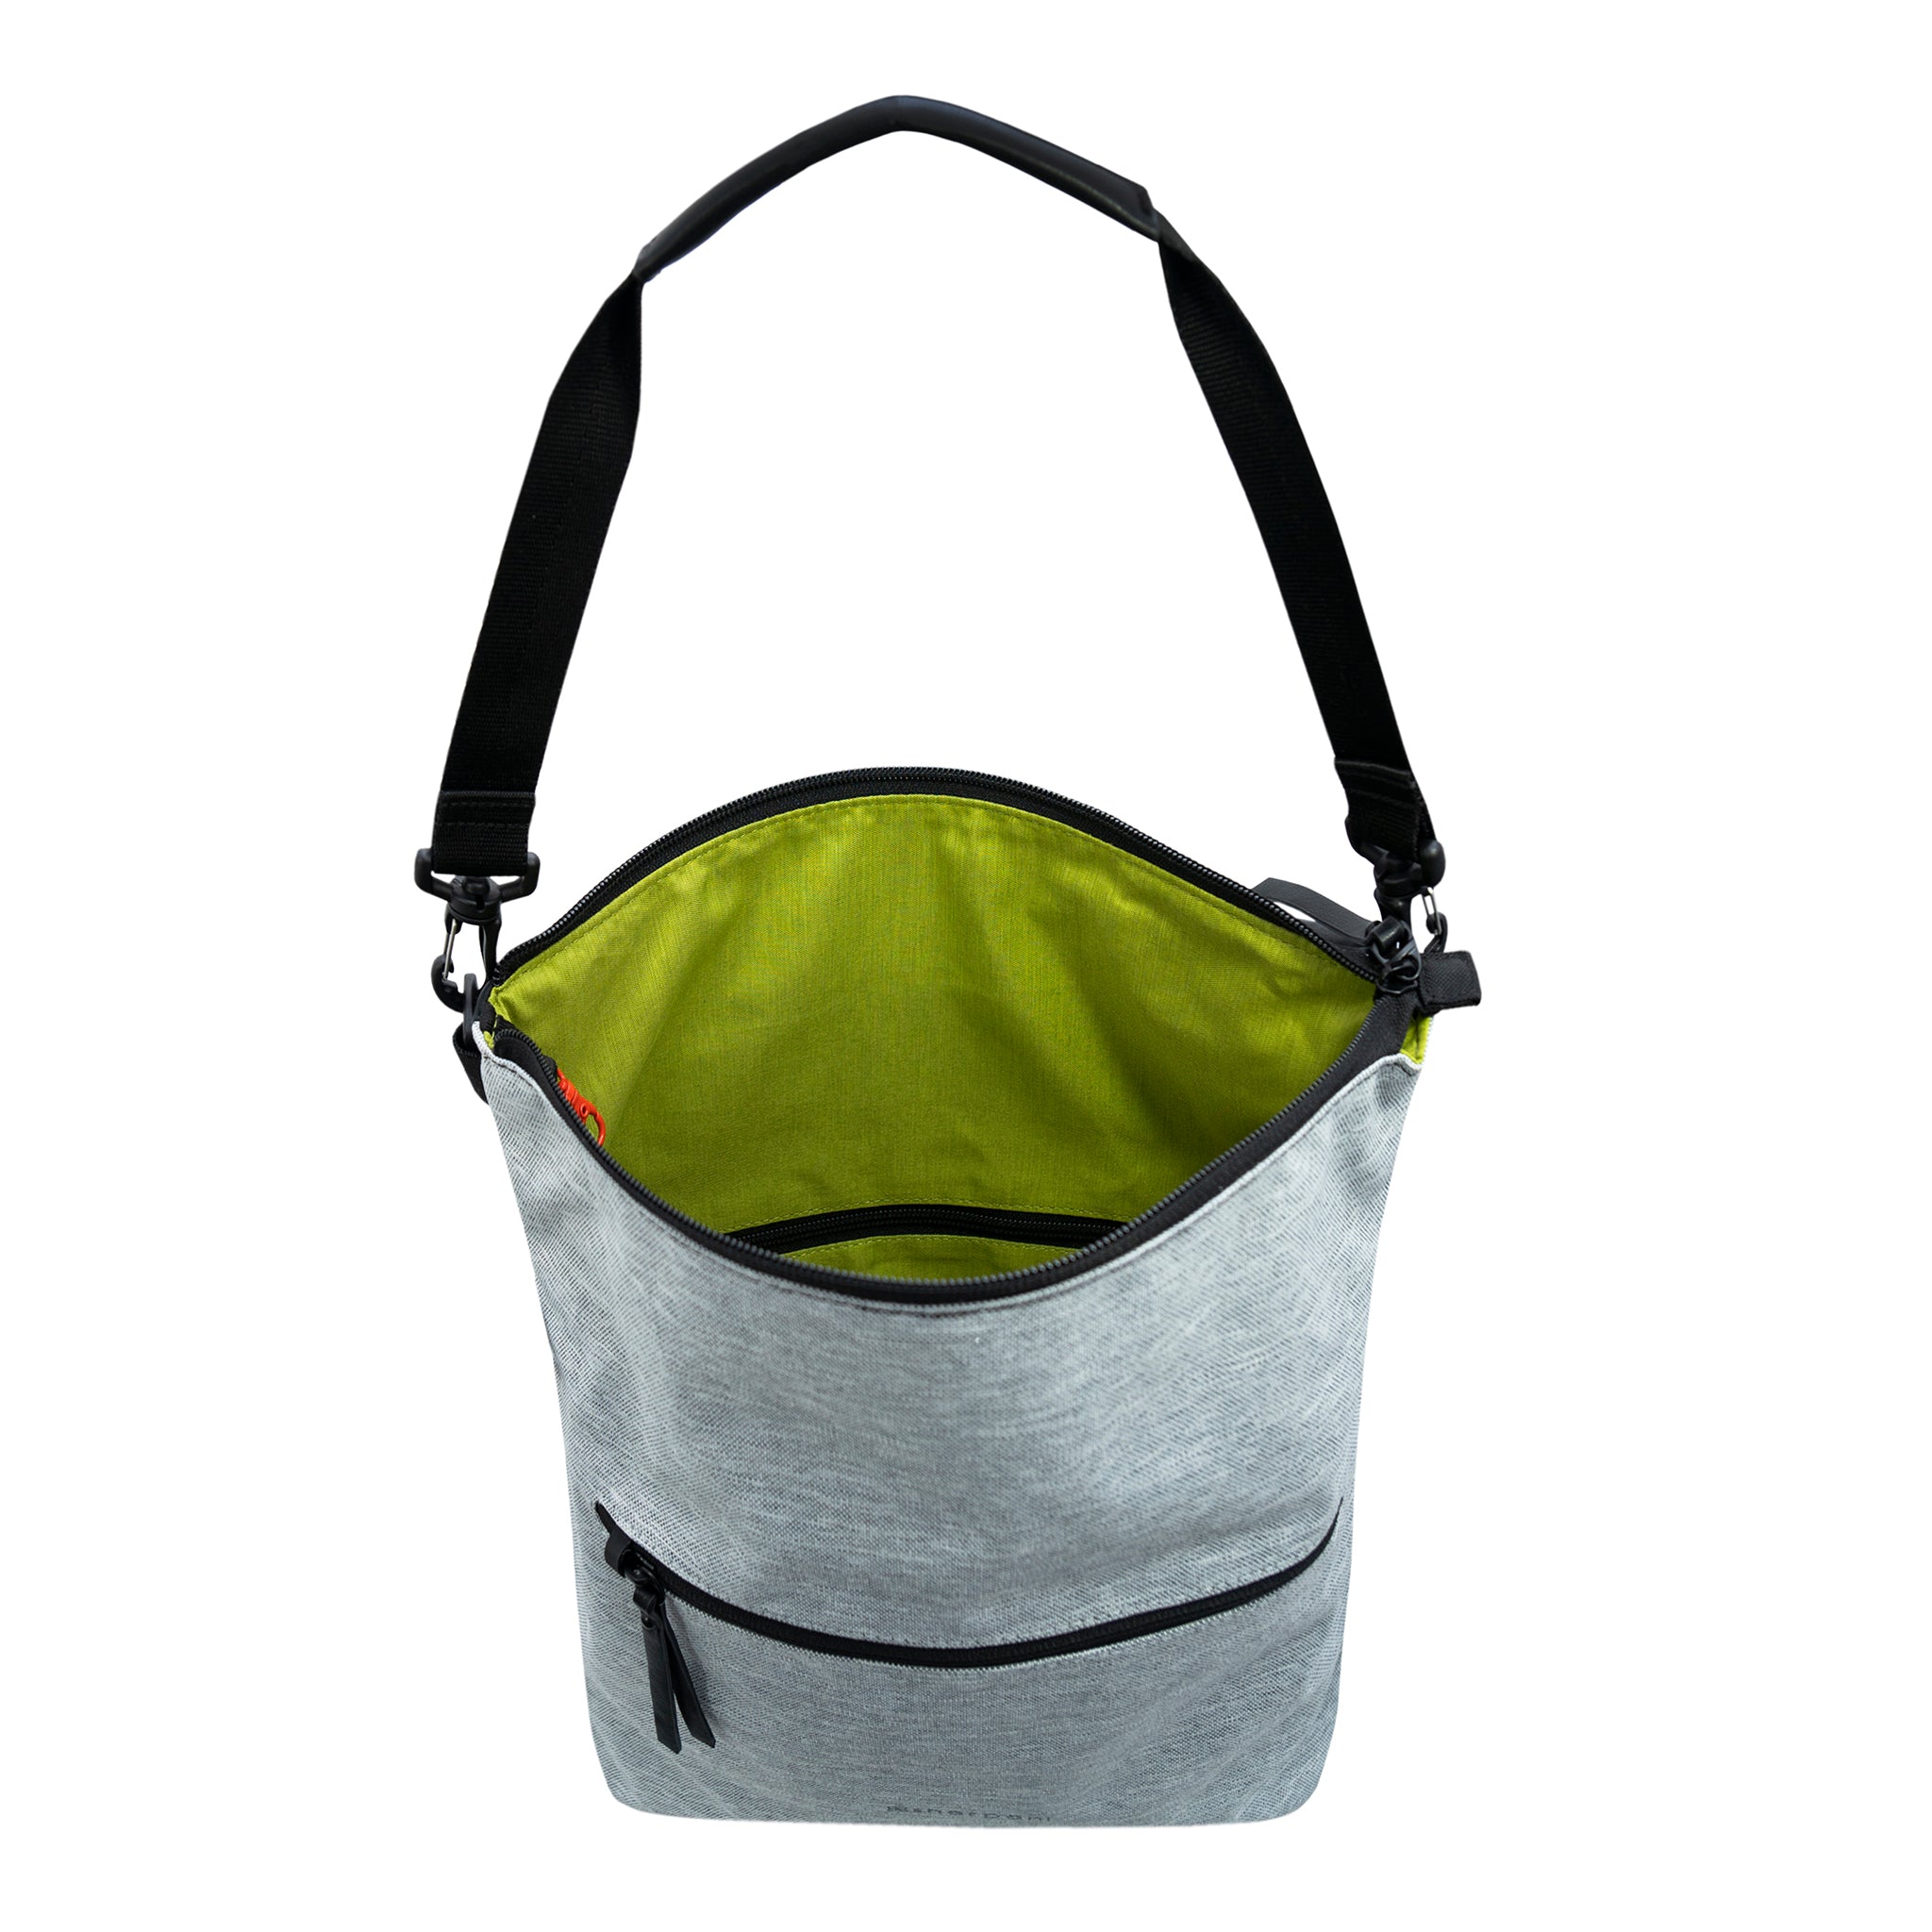 Top view of Sherpani’s Anti-Theft bag, the Vale AT in Sterling. The main zipper compartment is open to reveal a lime green interior with an internal zipper pocket. There is a red carabiner that acts as the zipper lock to the main compartment. The front features an external compartment with a locking zipper. A detachable tote strap is attached to the top of the bag. 